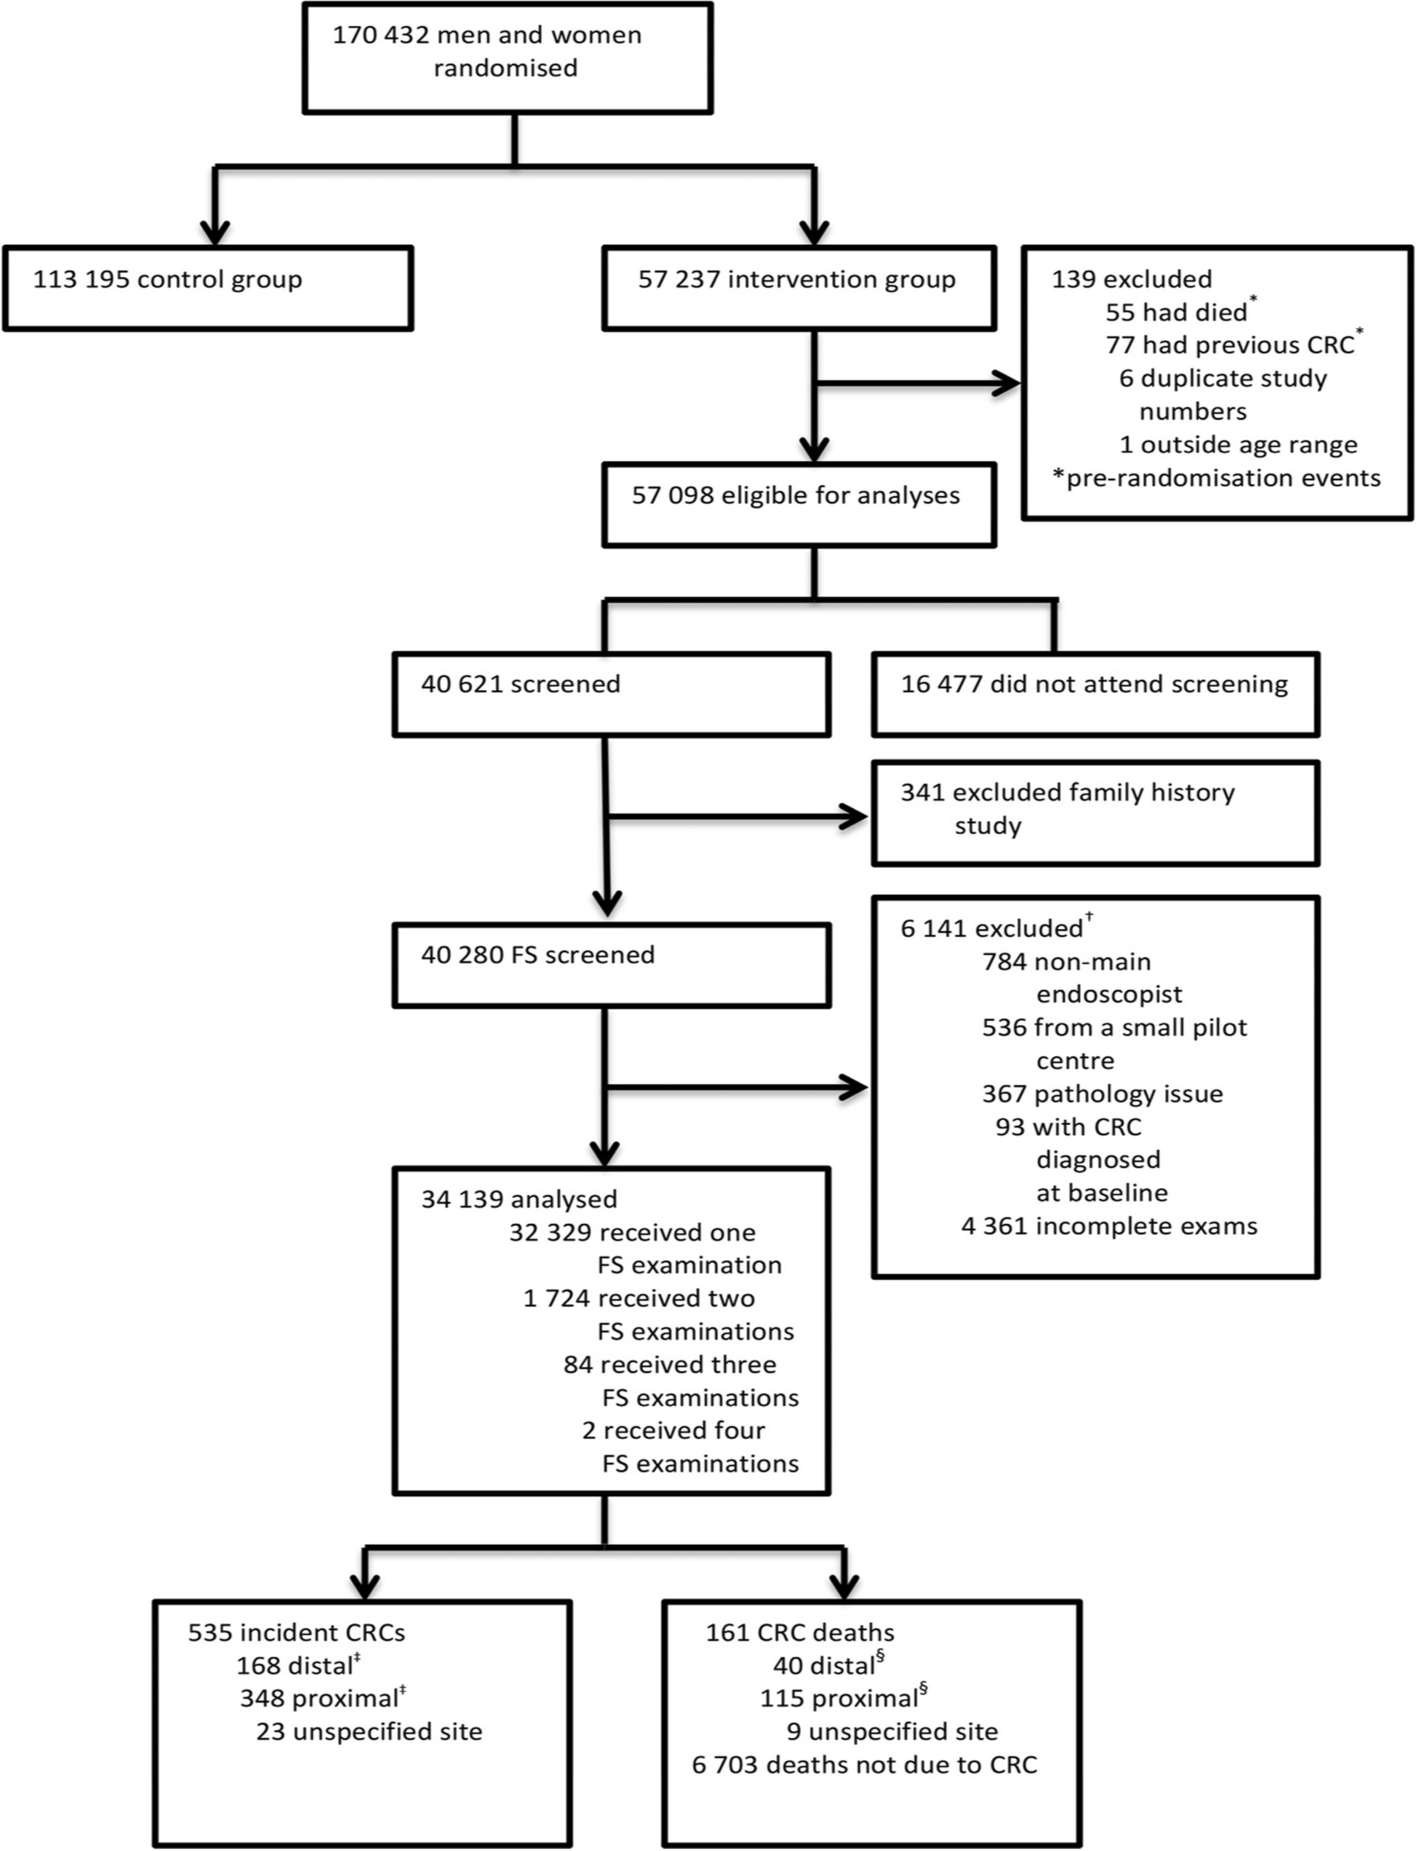 The impact of endoscopist performance and patient factors on distal adenoma detection and colorectal cancer incidence